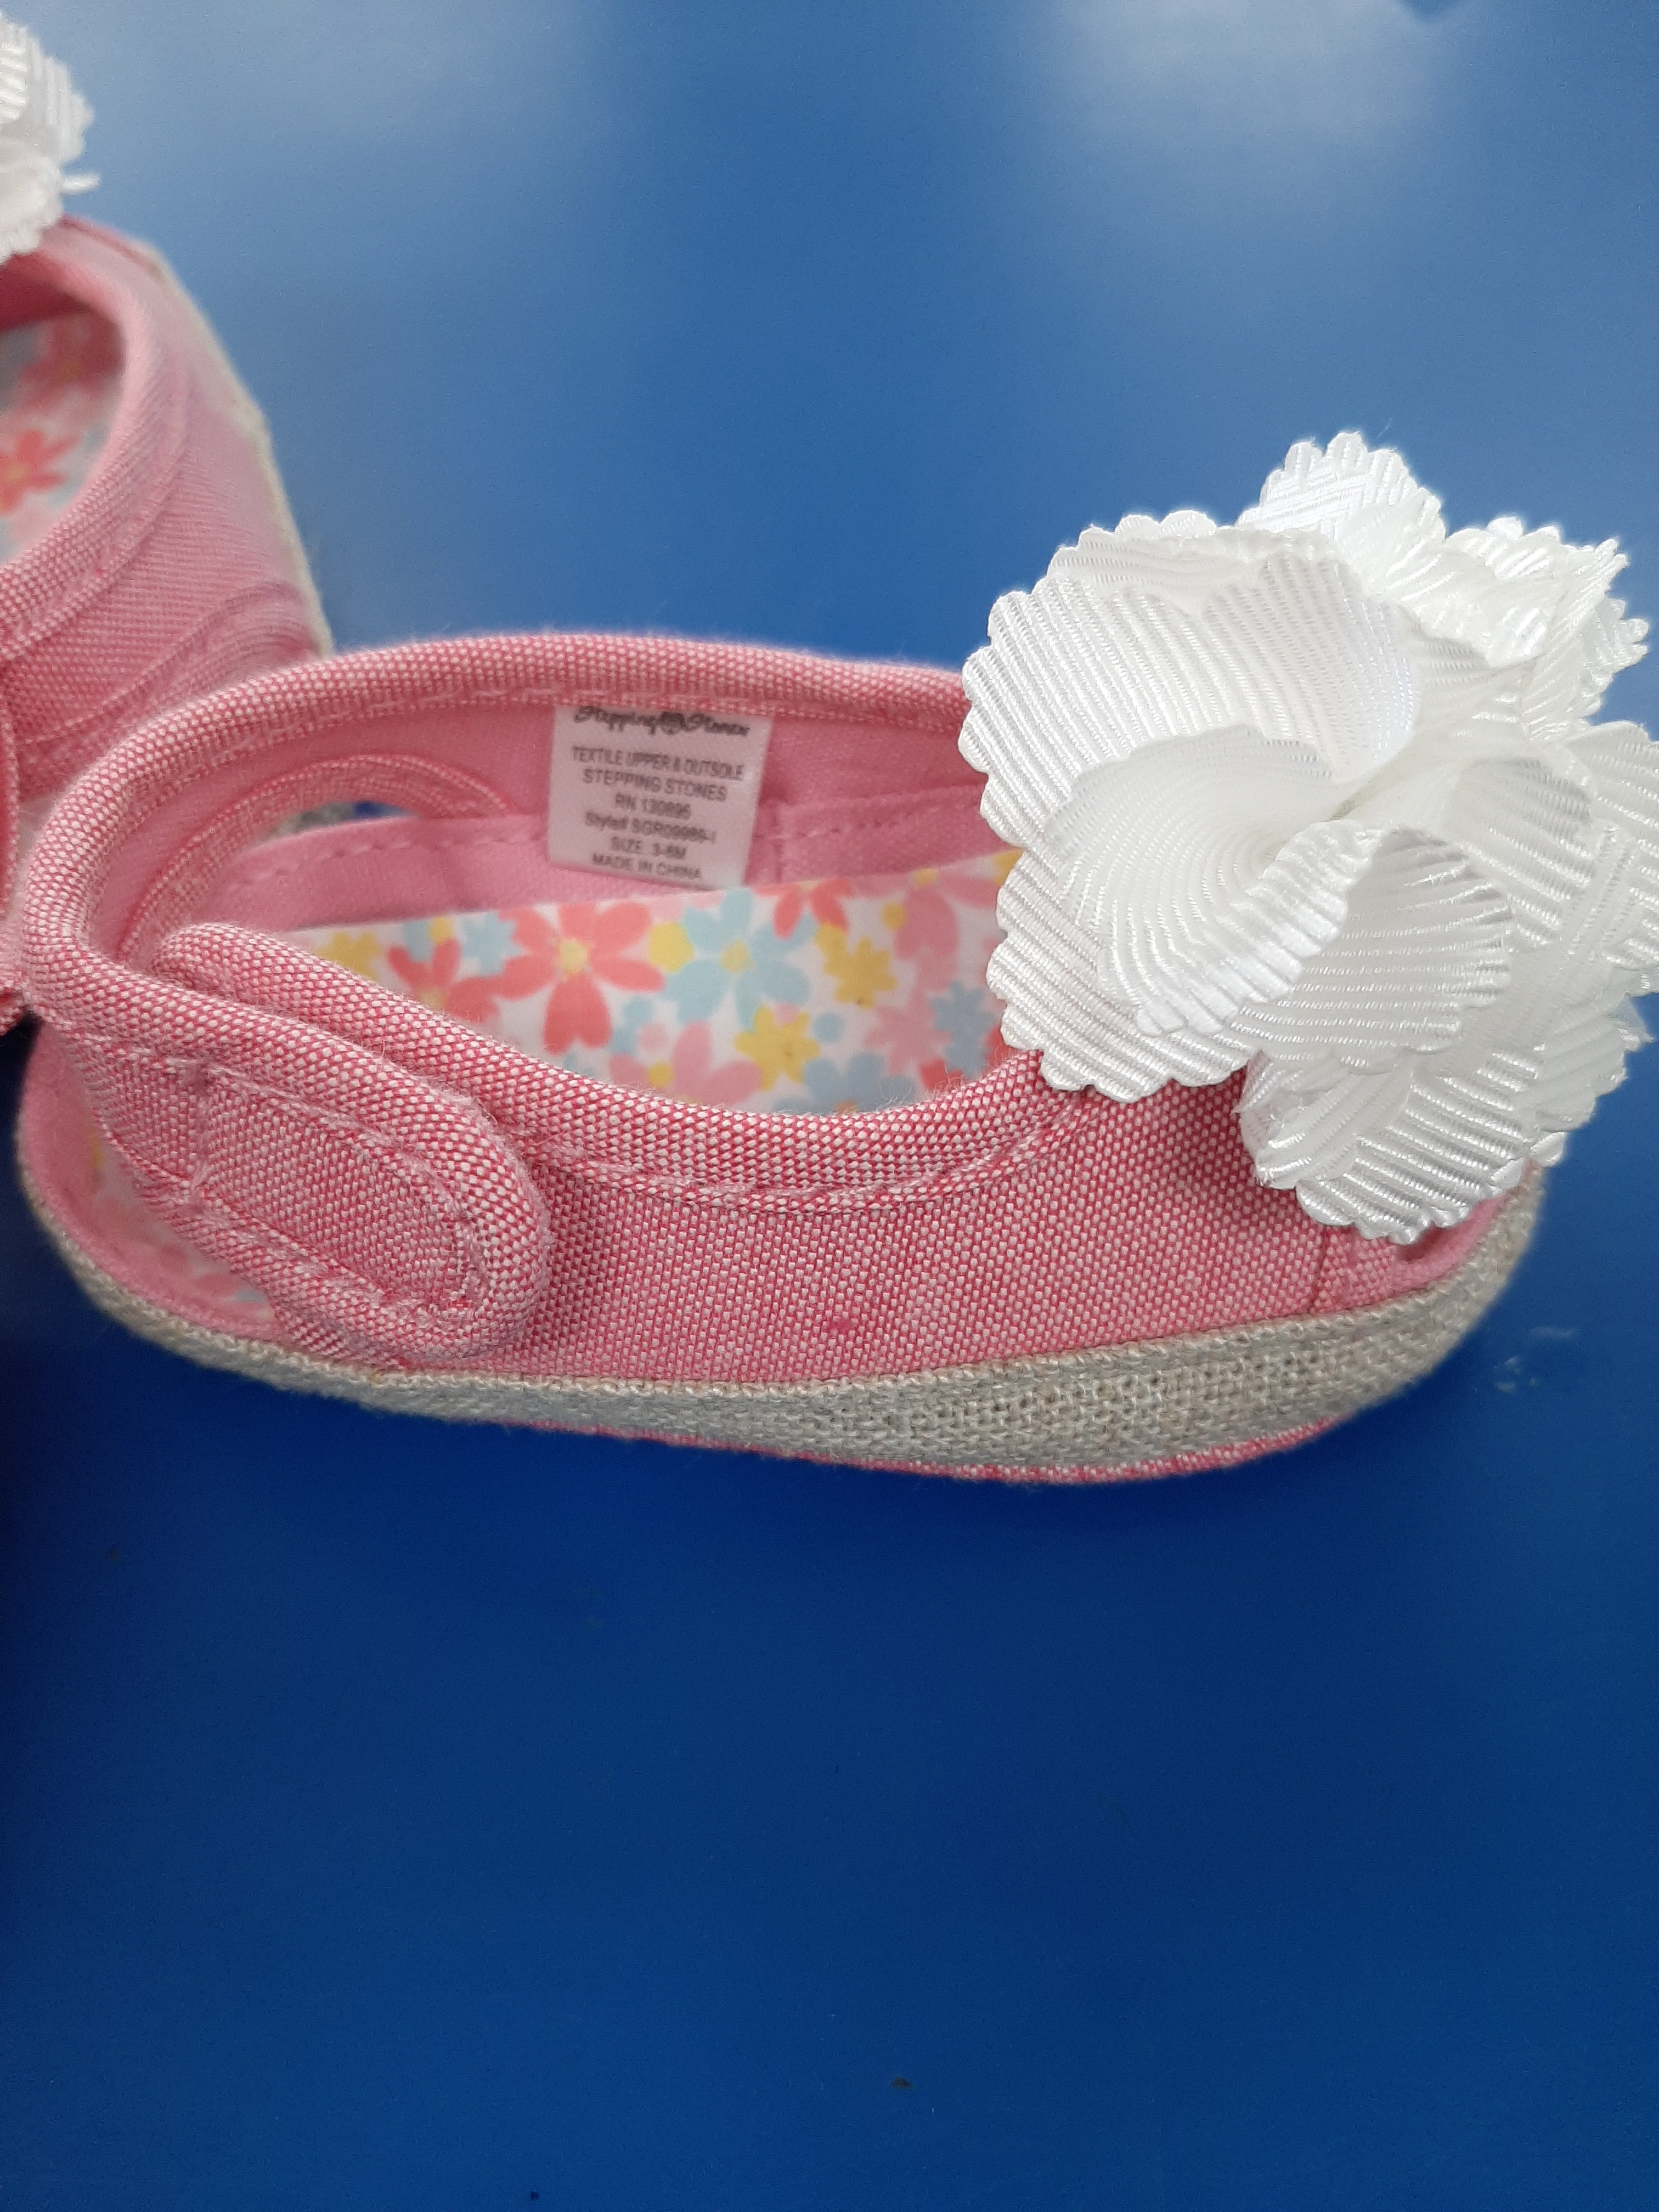 Pink New Canvas Sandles with Flower sz 3-6 mo